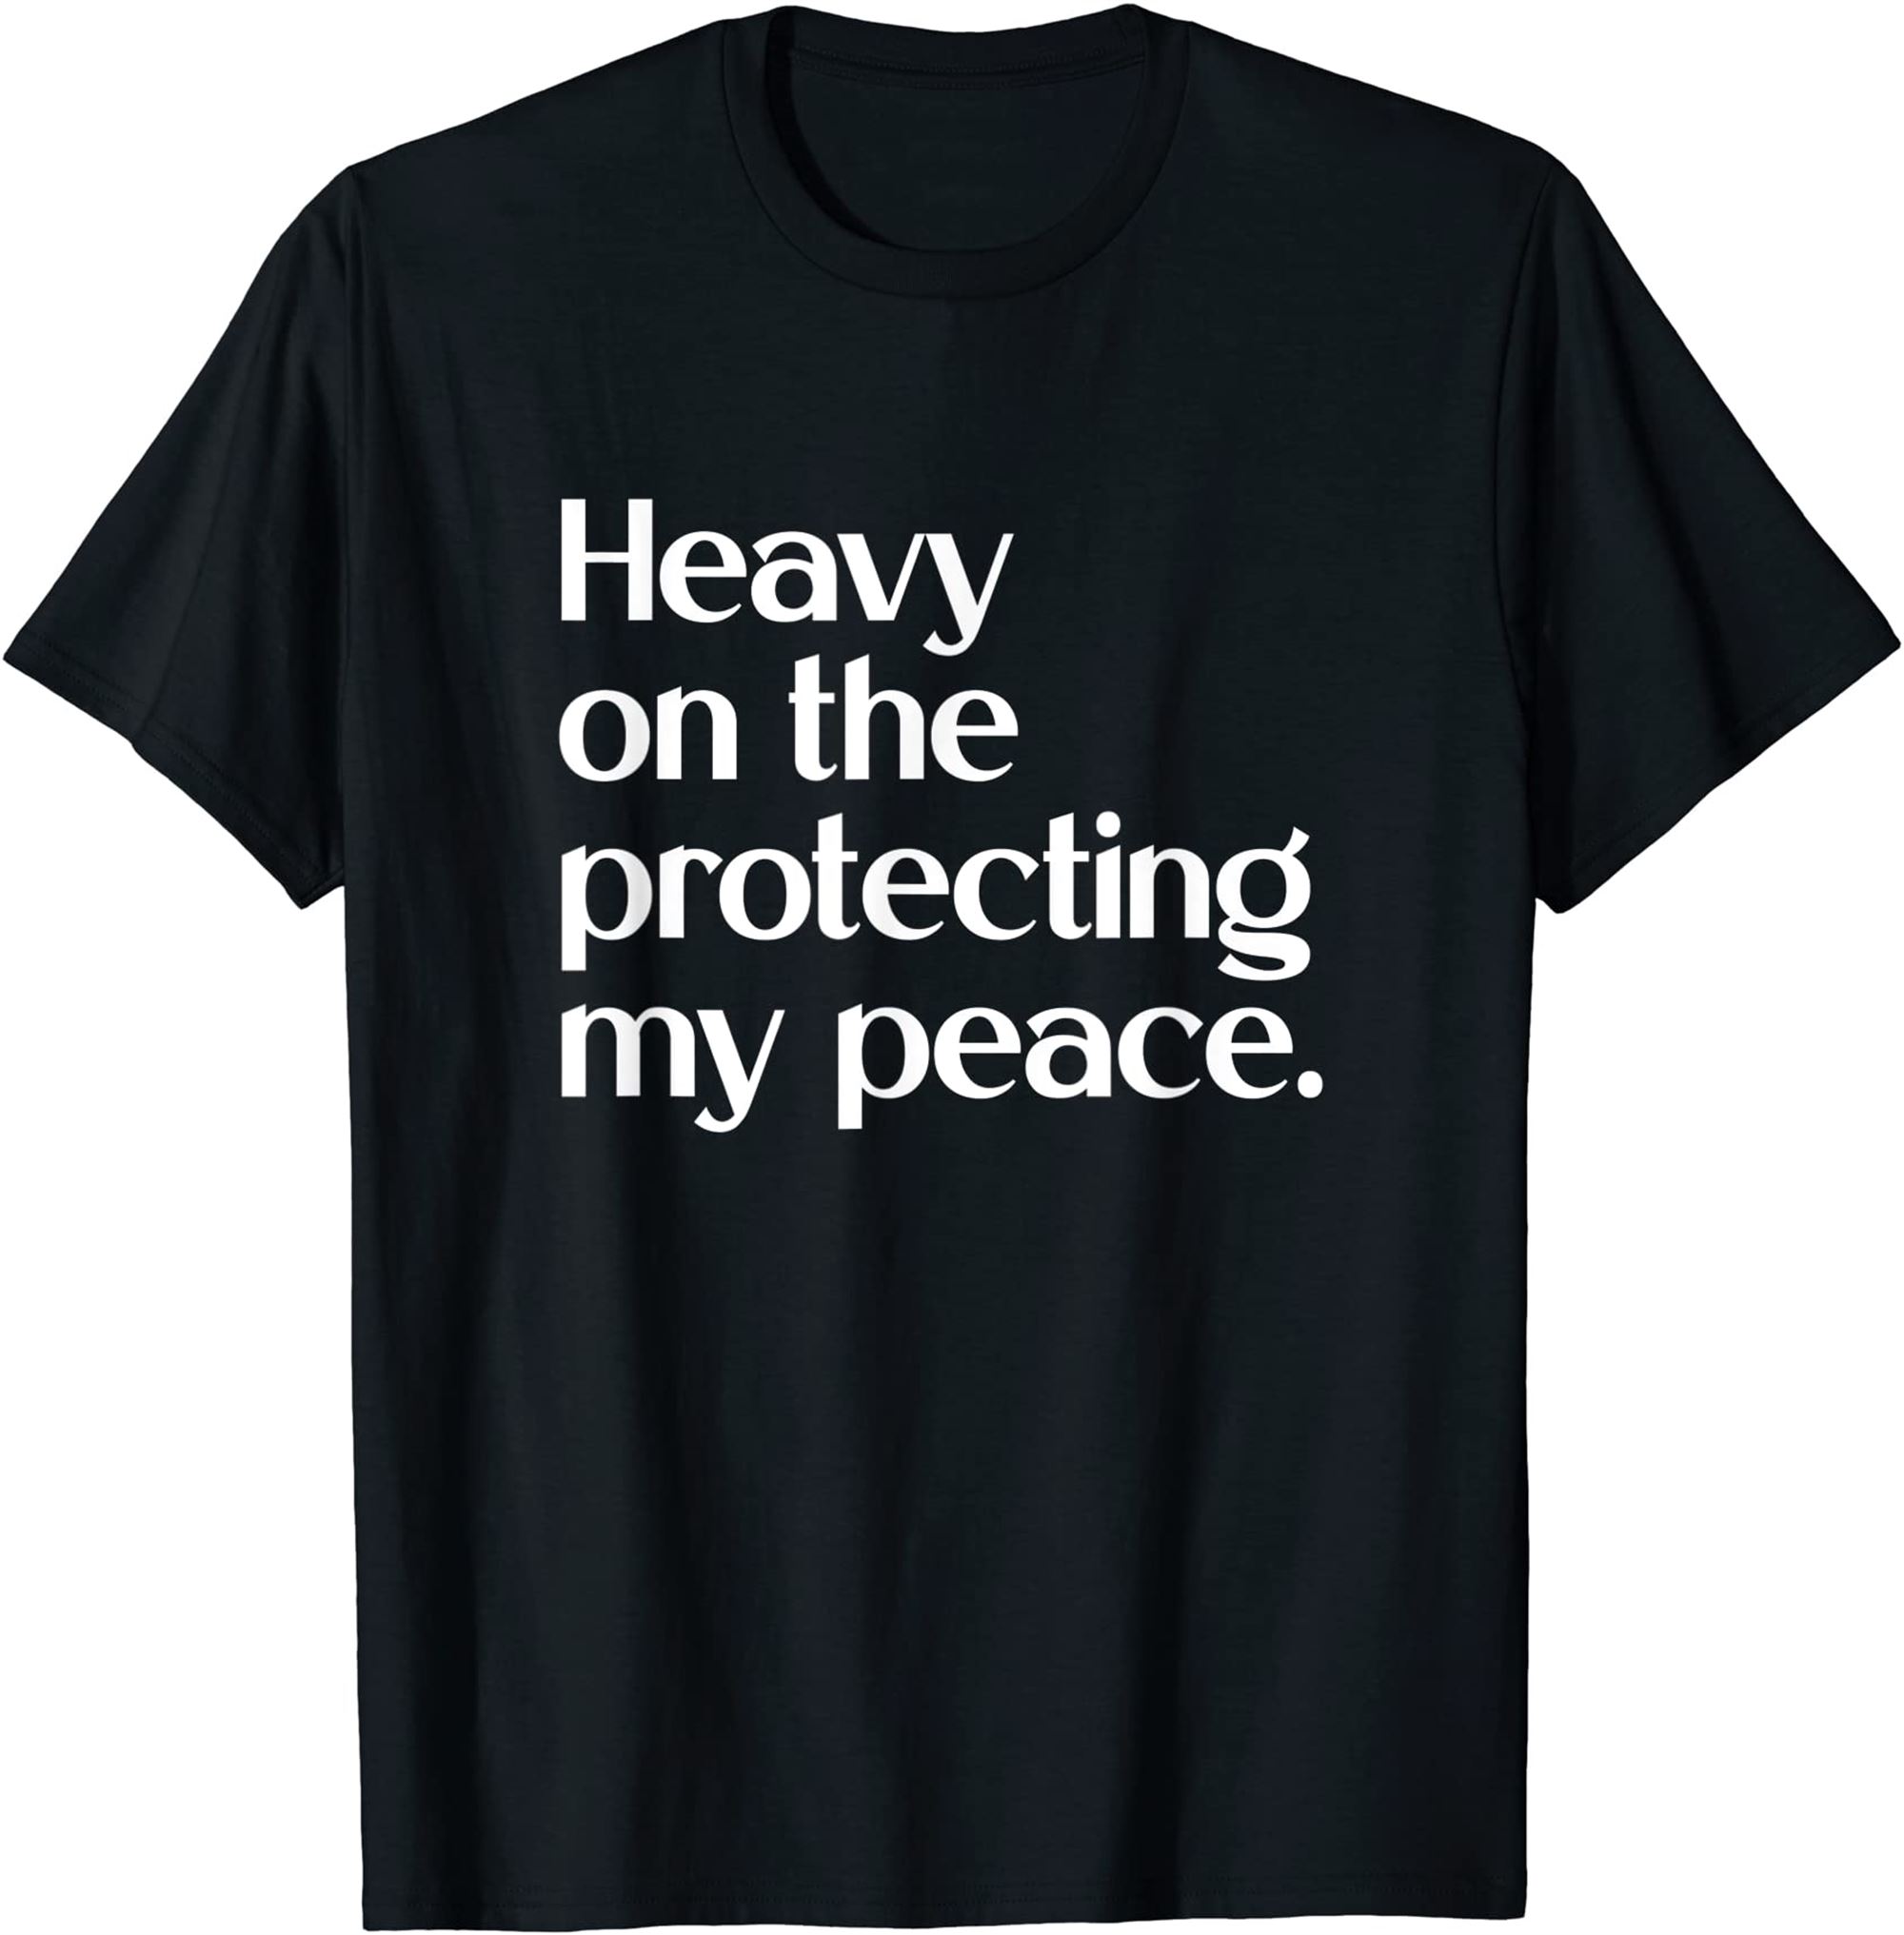 Heavy On The Protecting My Peace Apparel T-shirt Full Size Up To 5xl